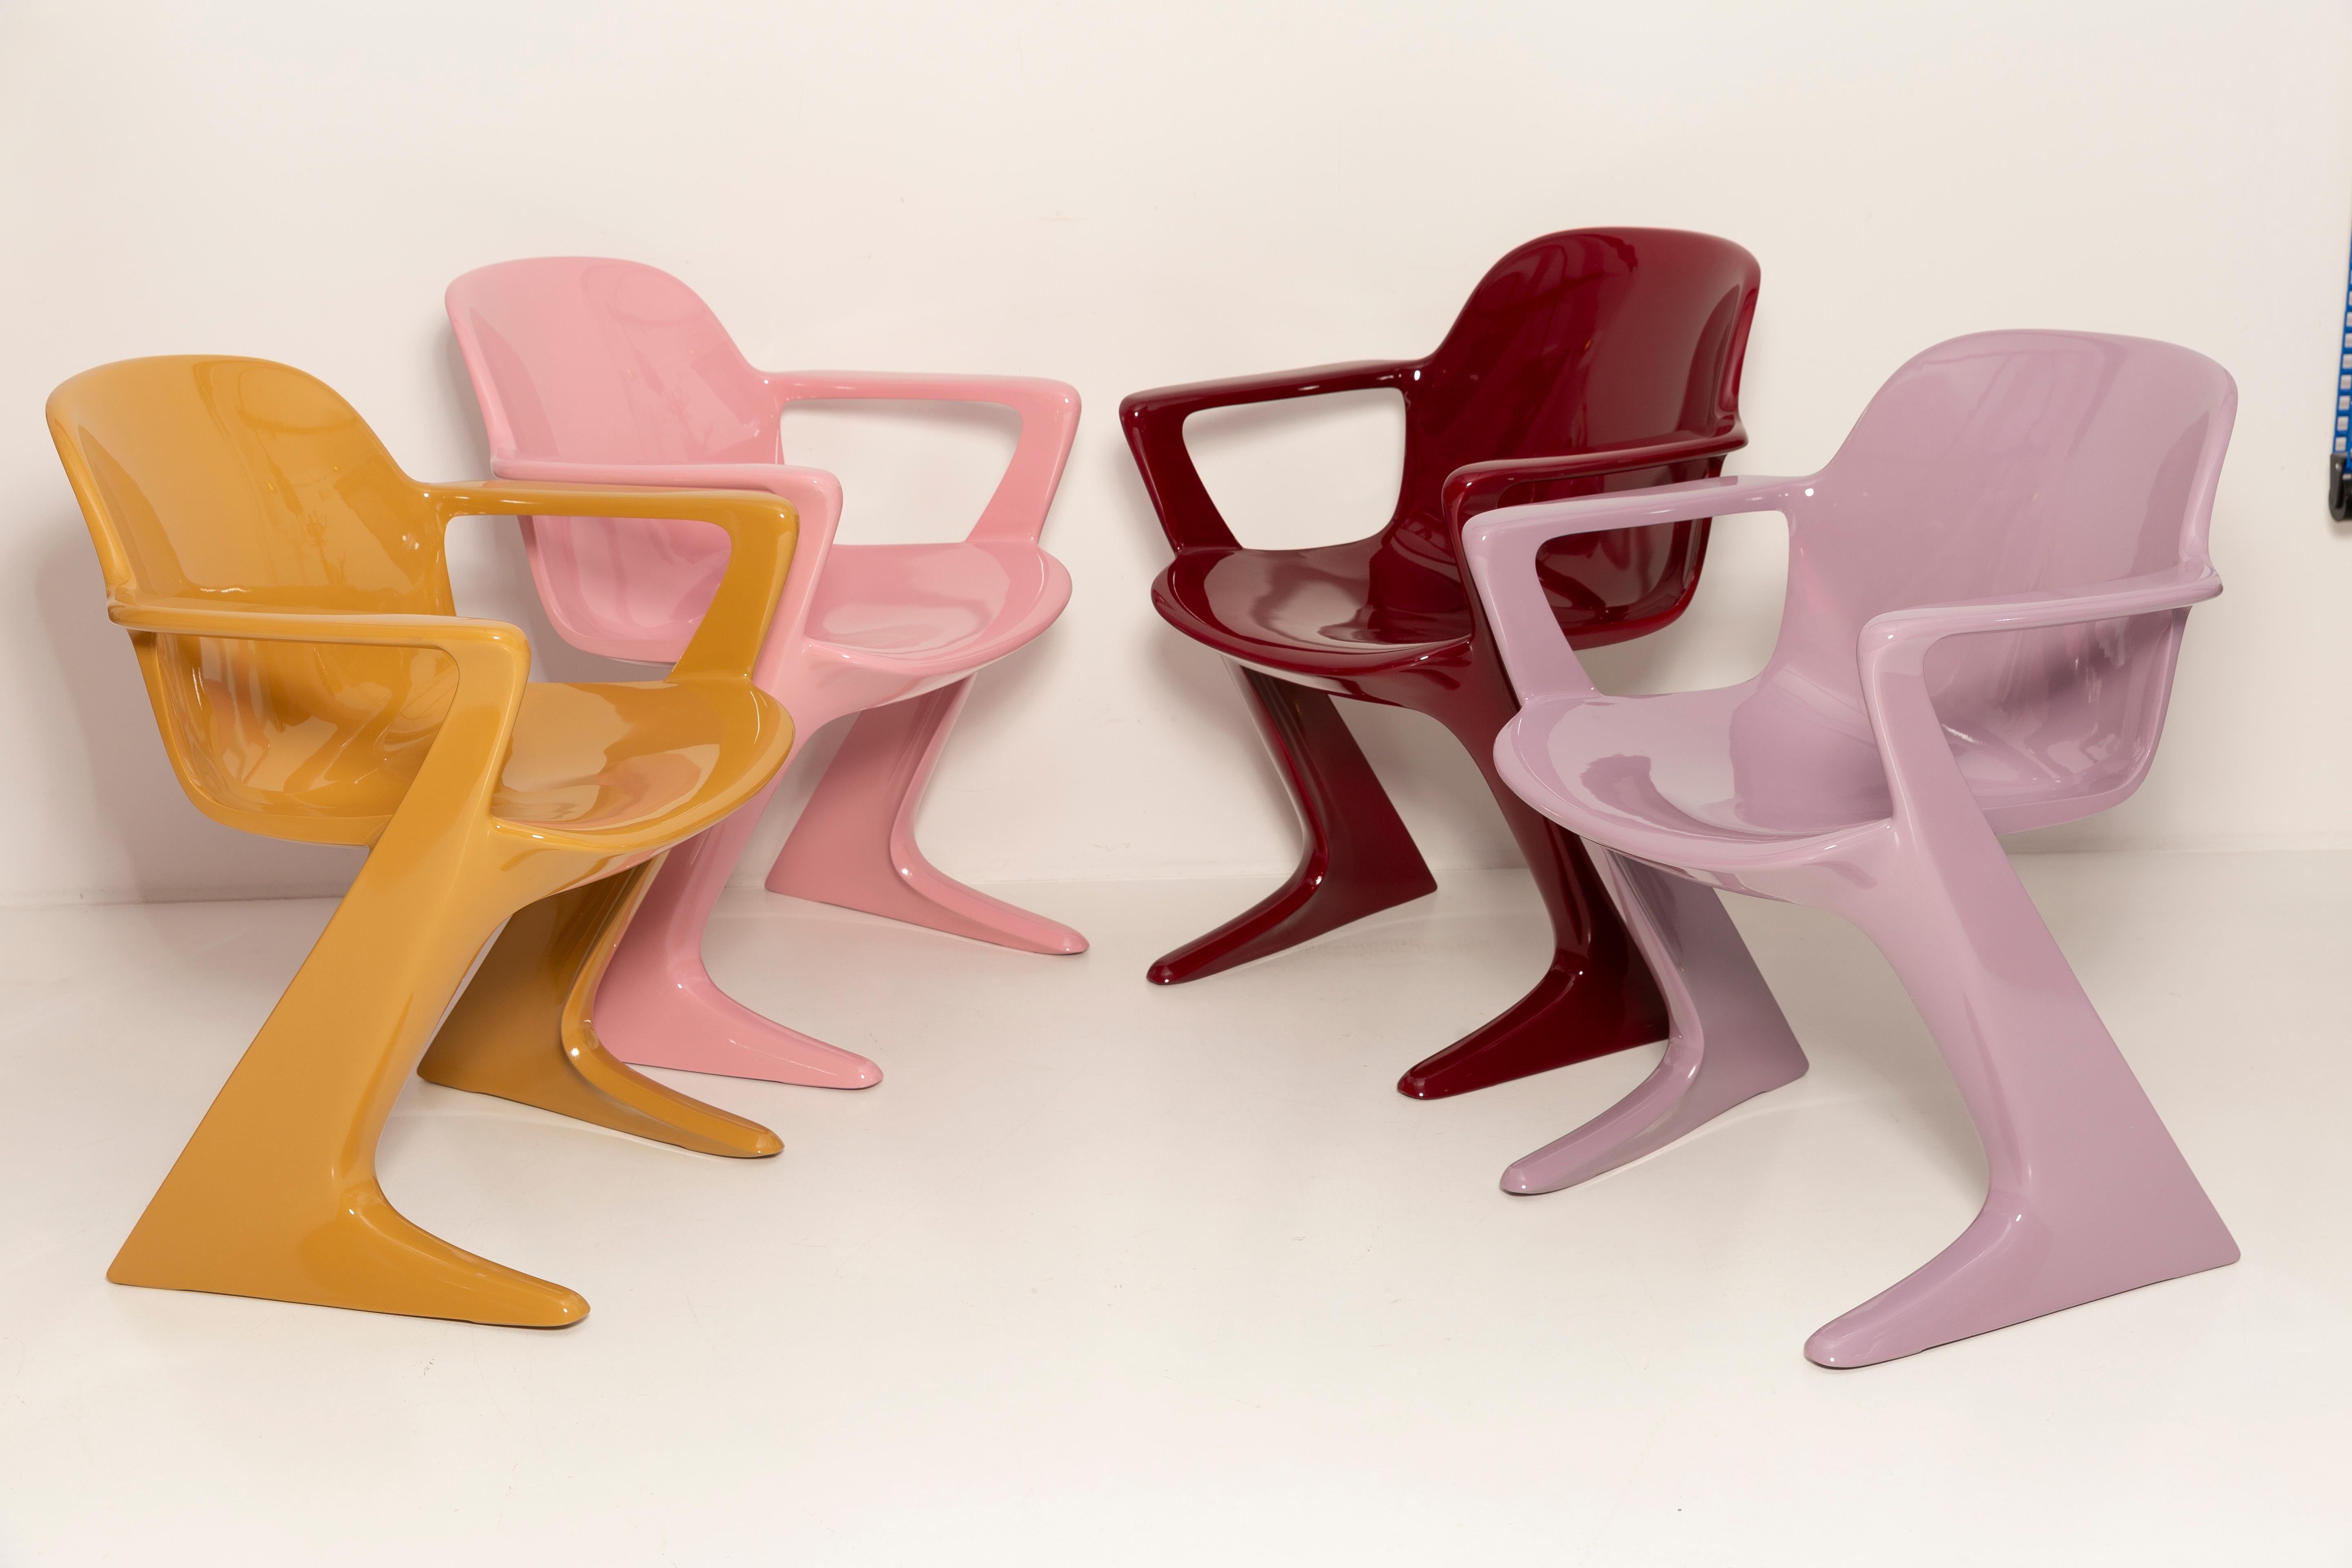 Lacquered Set of Three Mid Century Kangaroo Chairs, Ernst Moeckl, Germany, 1968 For Sale